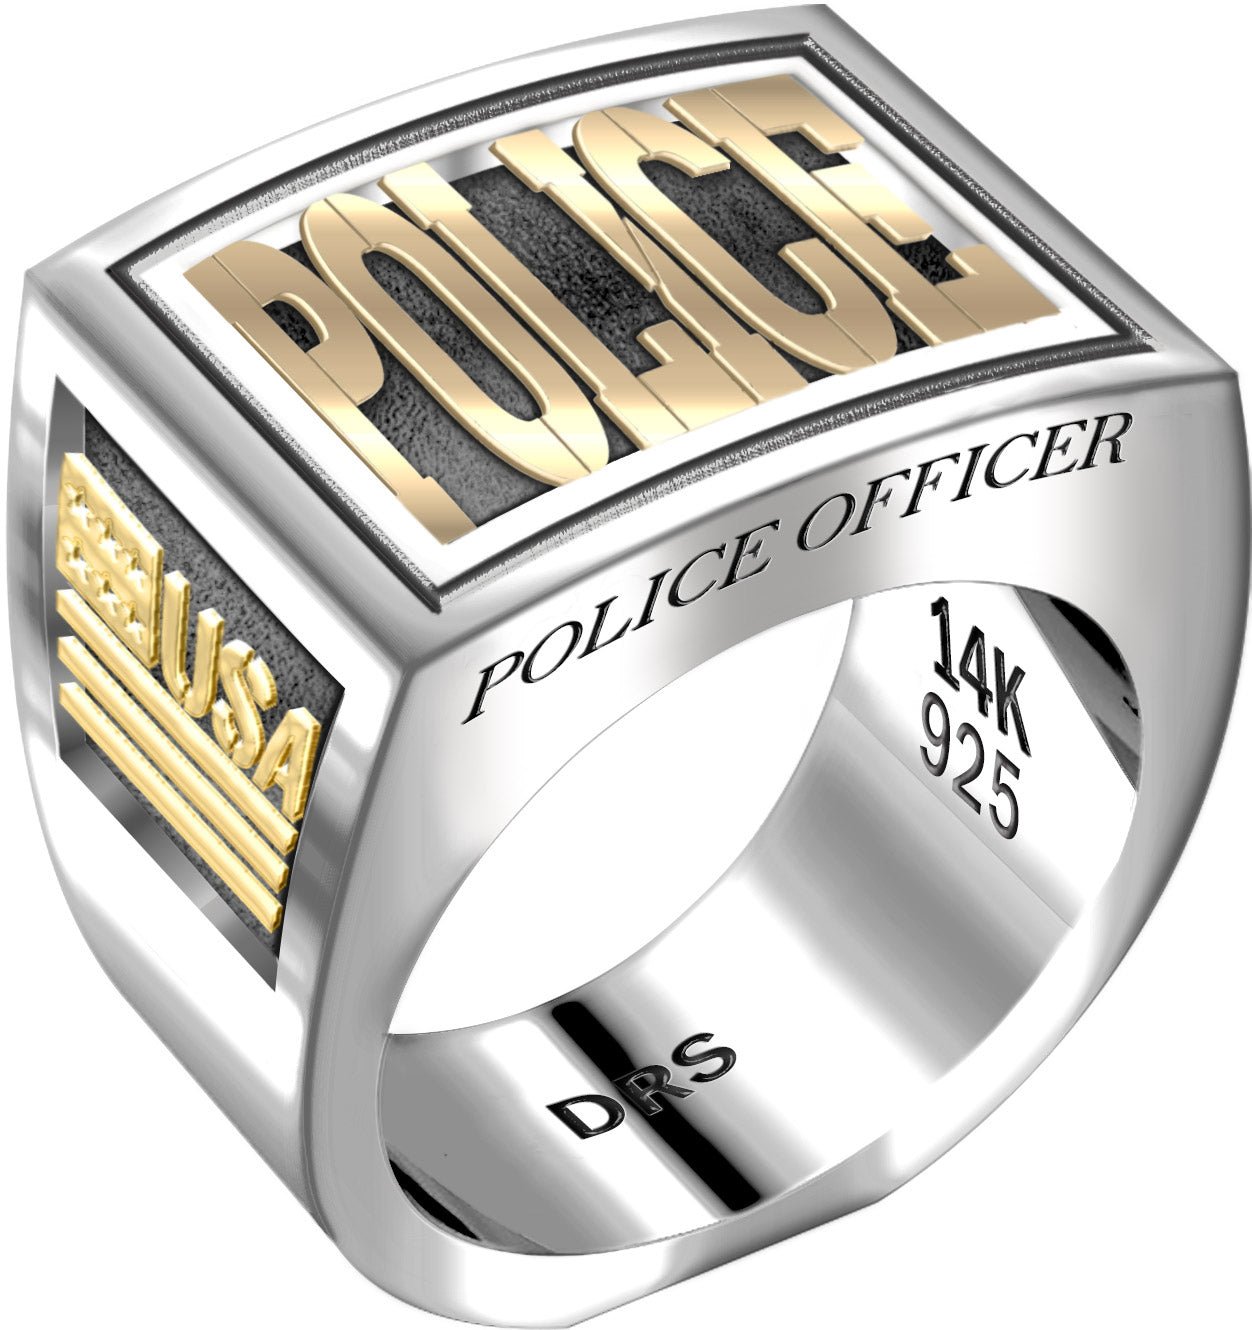 Men's Heavy Two Tone 925 Sterling Silver and 14k Yellow Gold Police Officer Ring Band - US Jewels